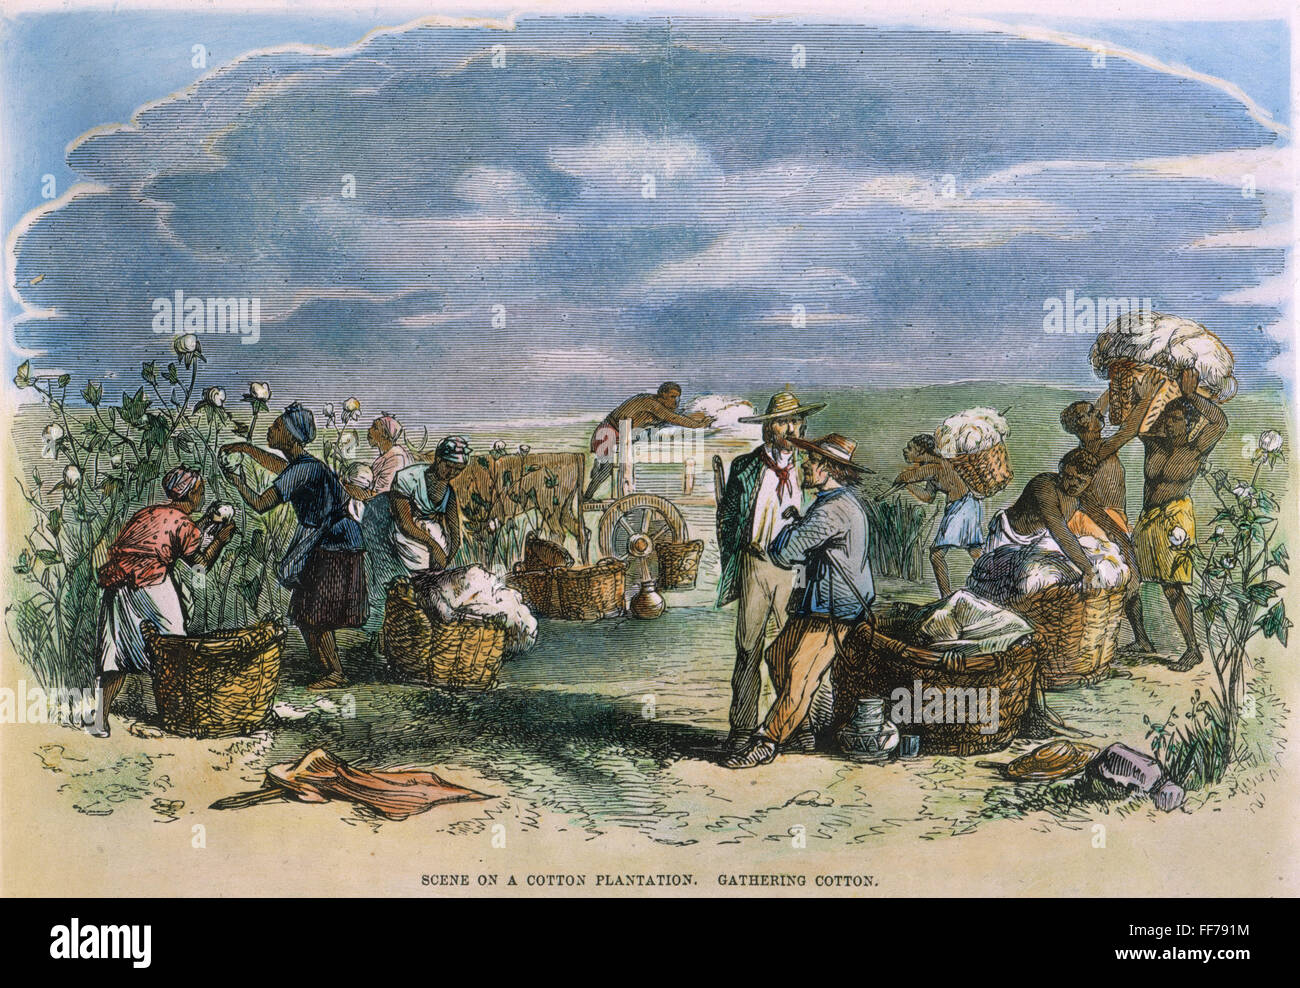 PLANTATION: COTTON. /nOverseers and slaves on a cotton plantation in the American South, c1860: colored engraving, 19th century. Stock Photo